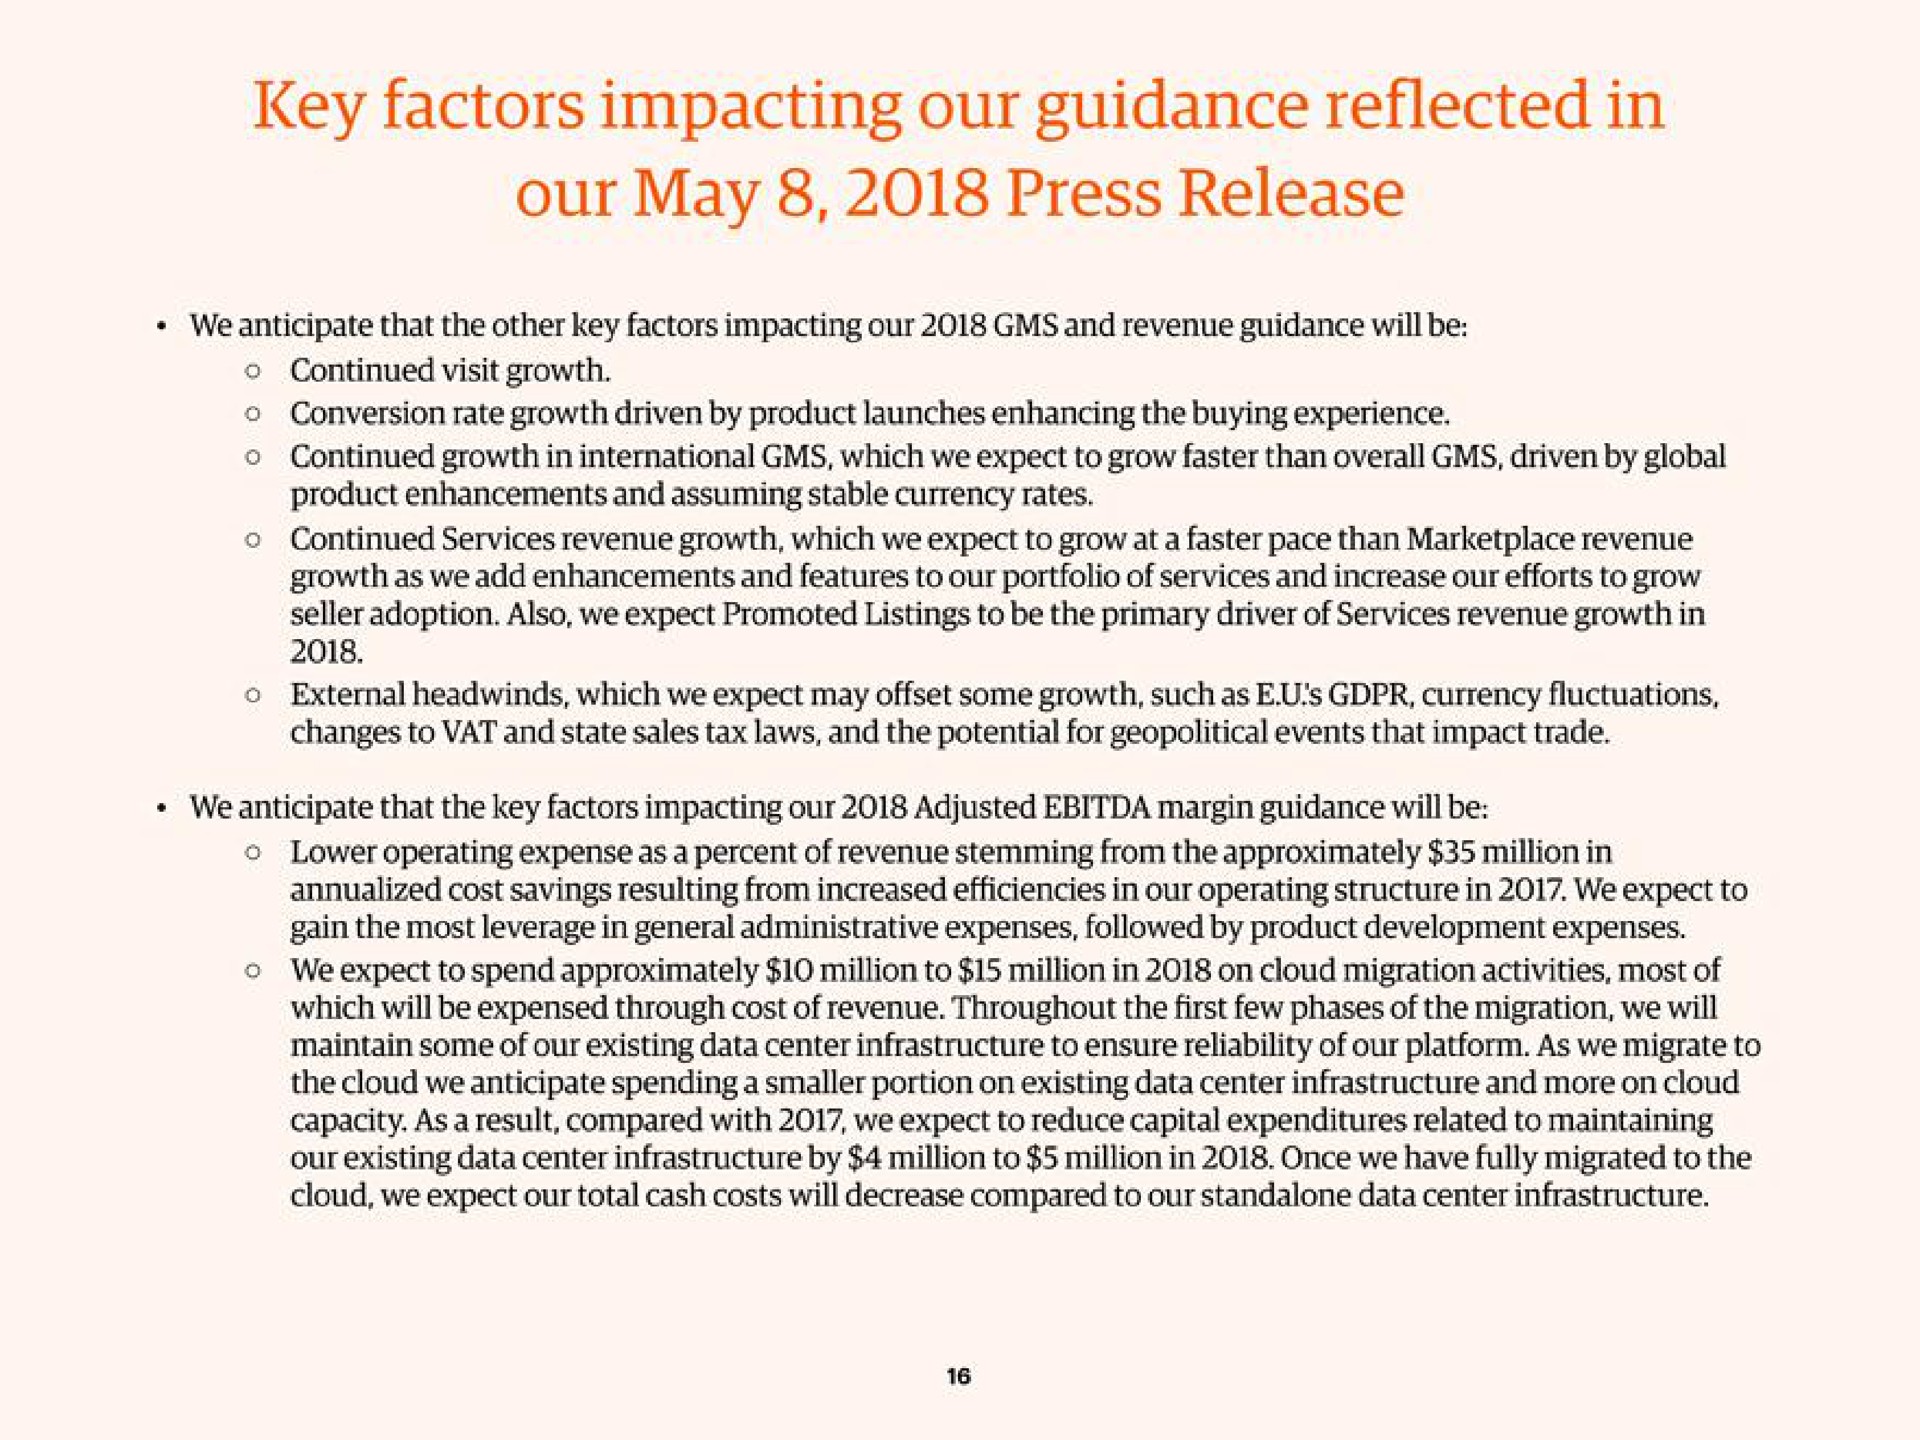 key factors impacting our guidance reflected in our may press release | Etsy